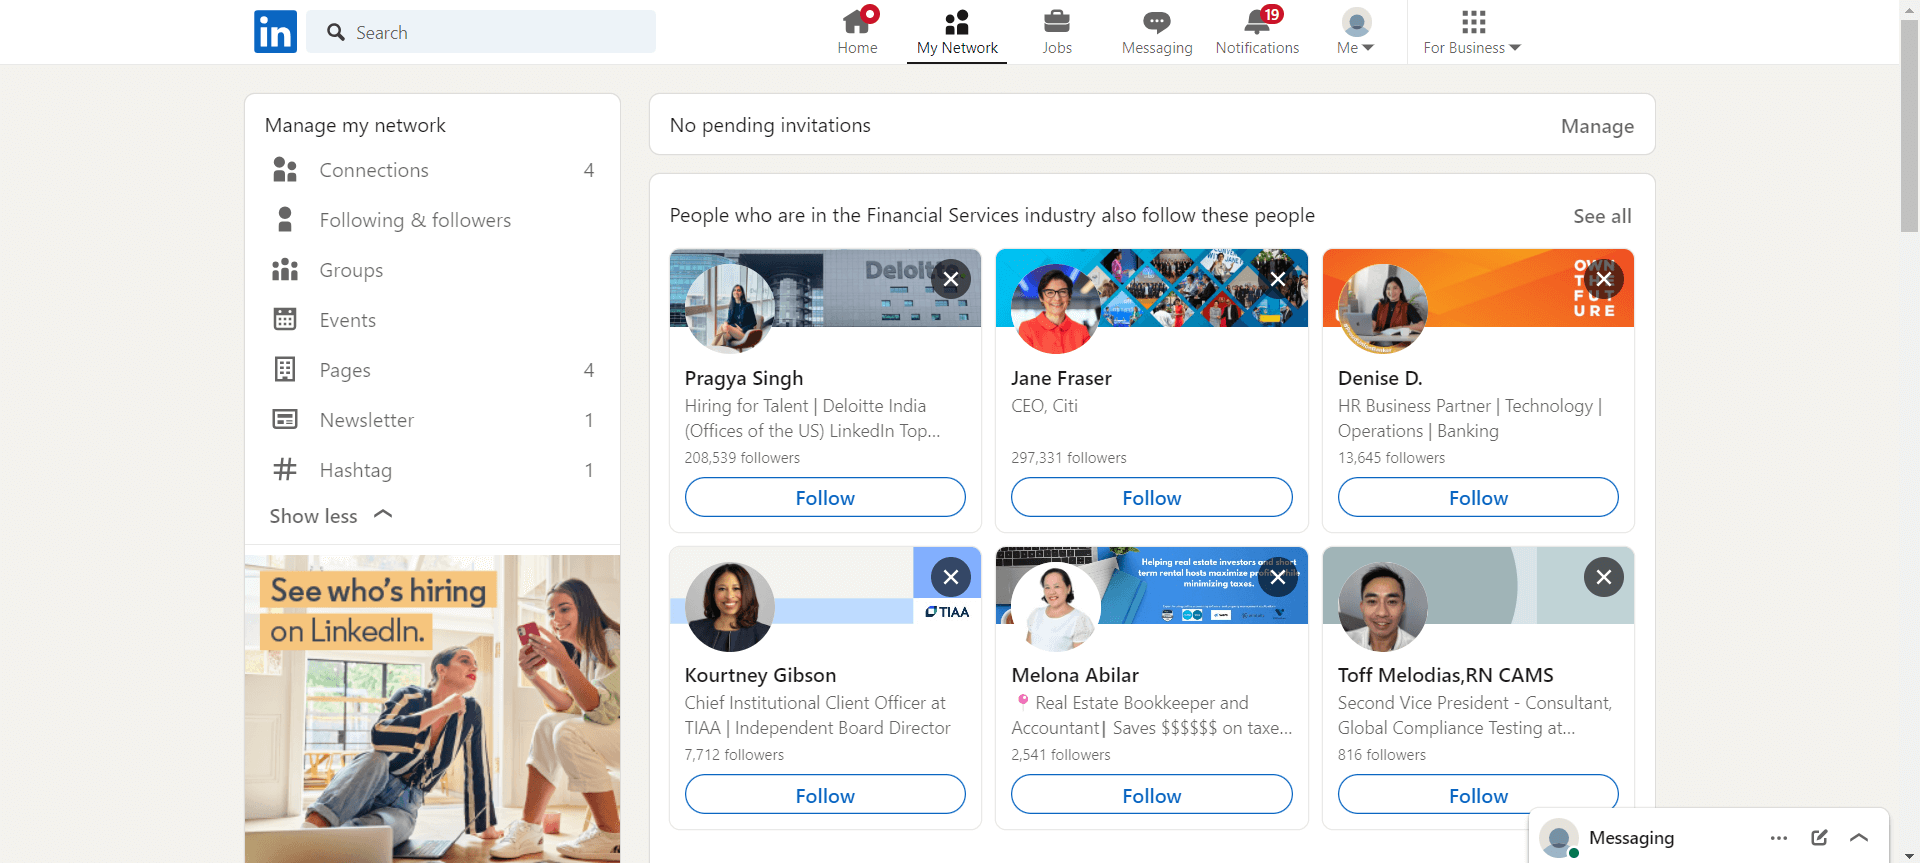 LinkedIn suggestions of people to follow